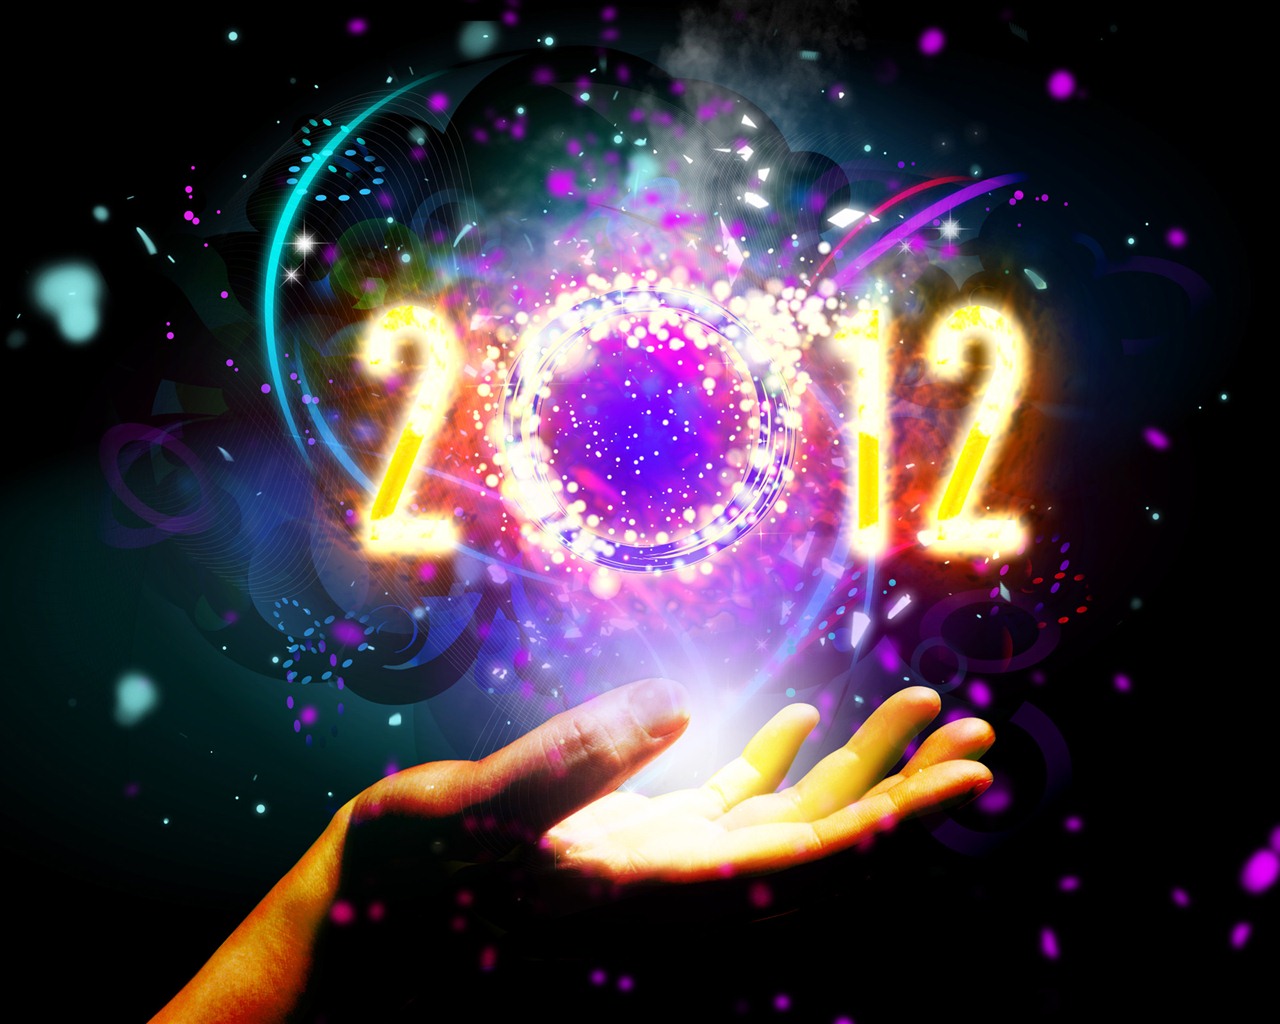 2012 New Year wallpapers (2) #12 - 1280x1024